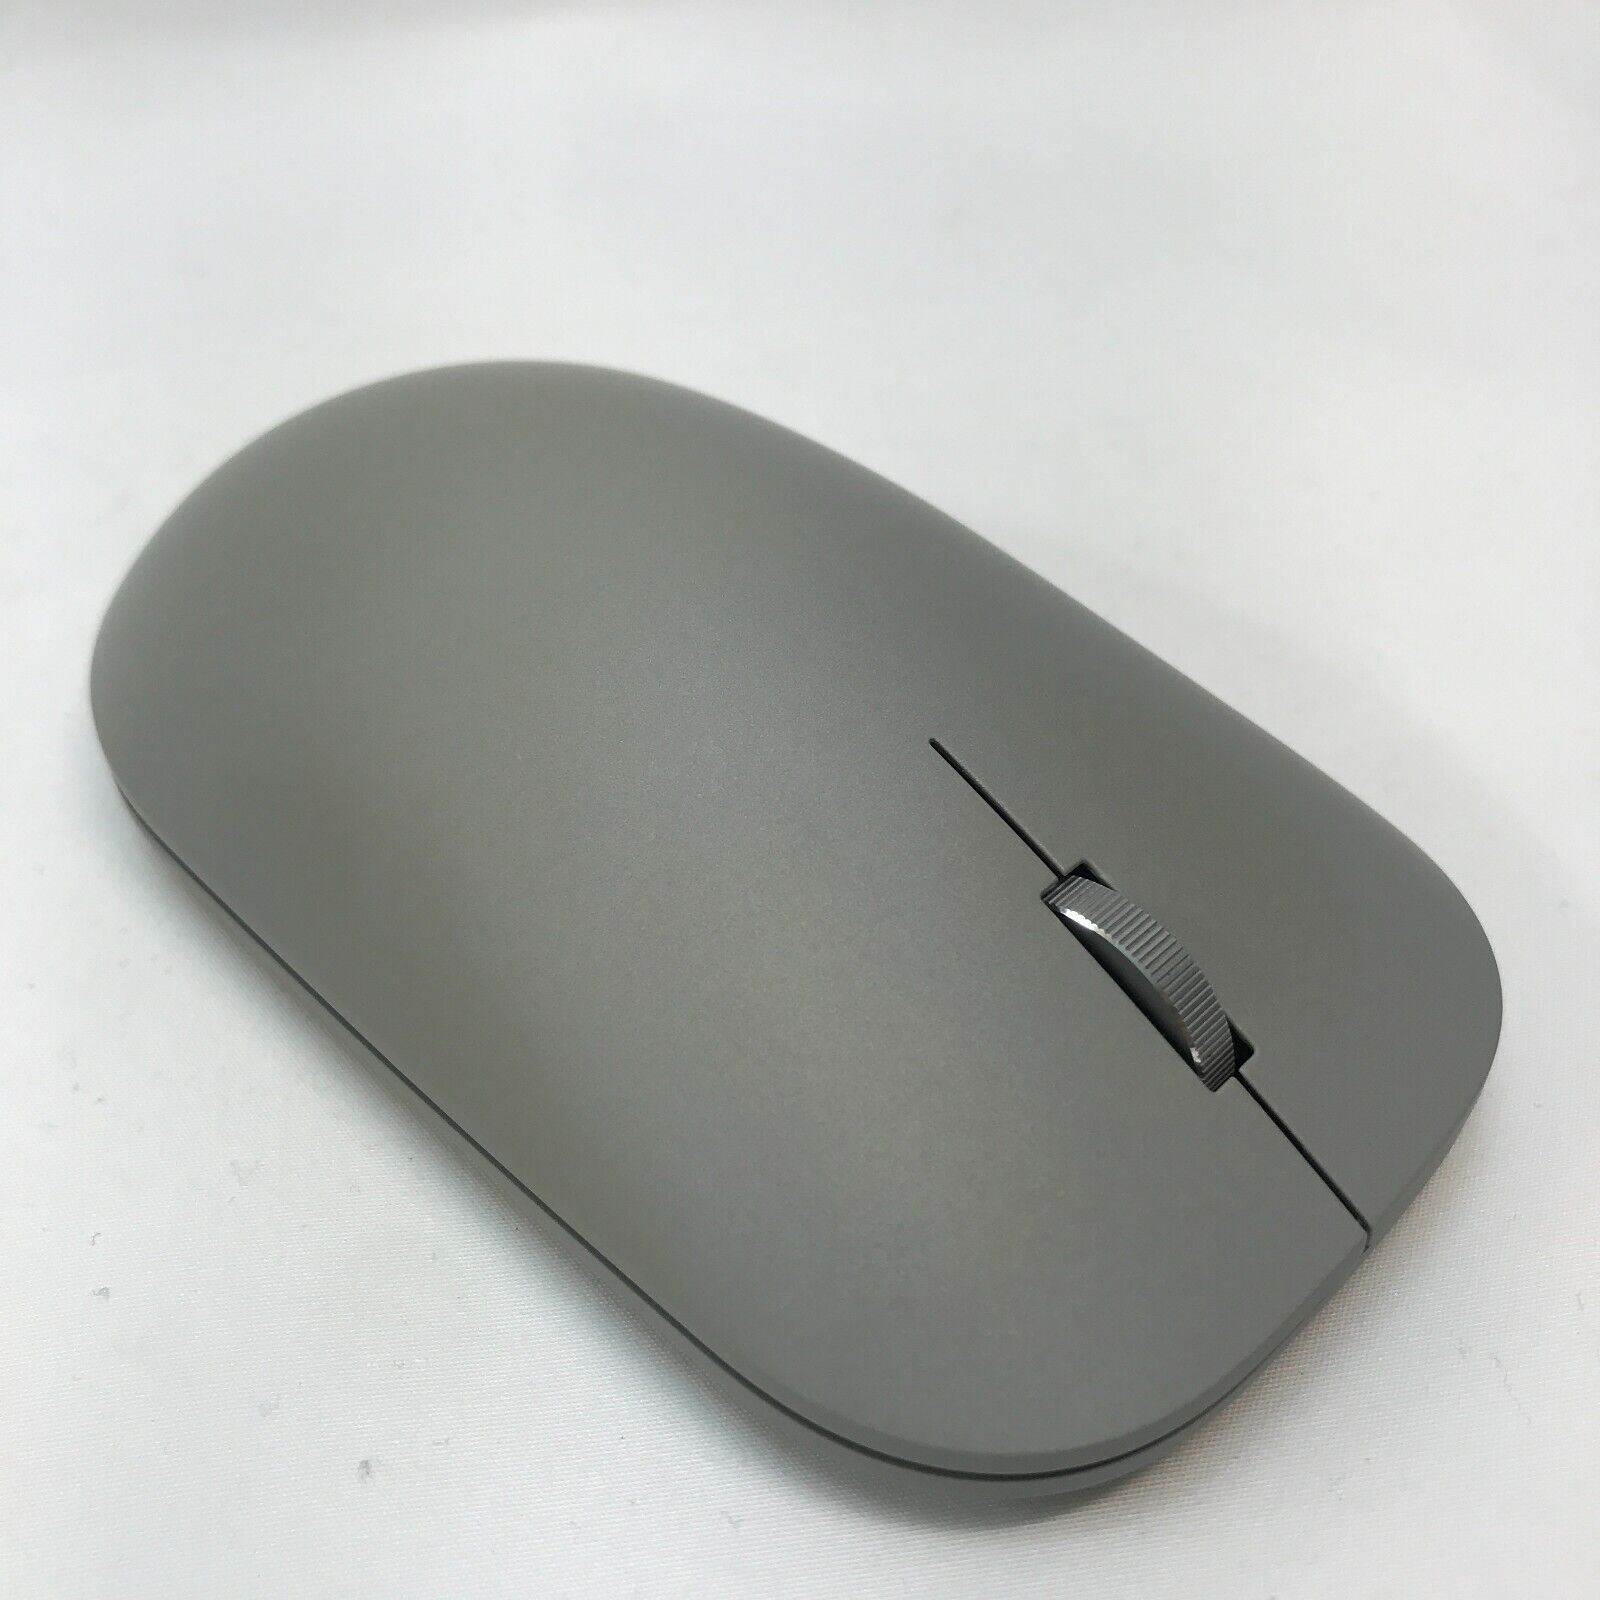 Genuine Microsoft 1741 Wireless Bluetooth Mouse for Computers and Laptops - Grey